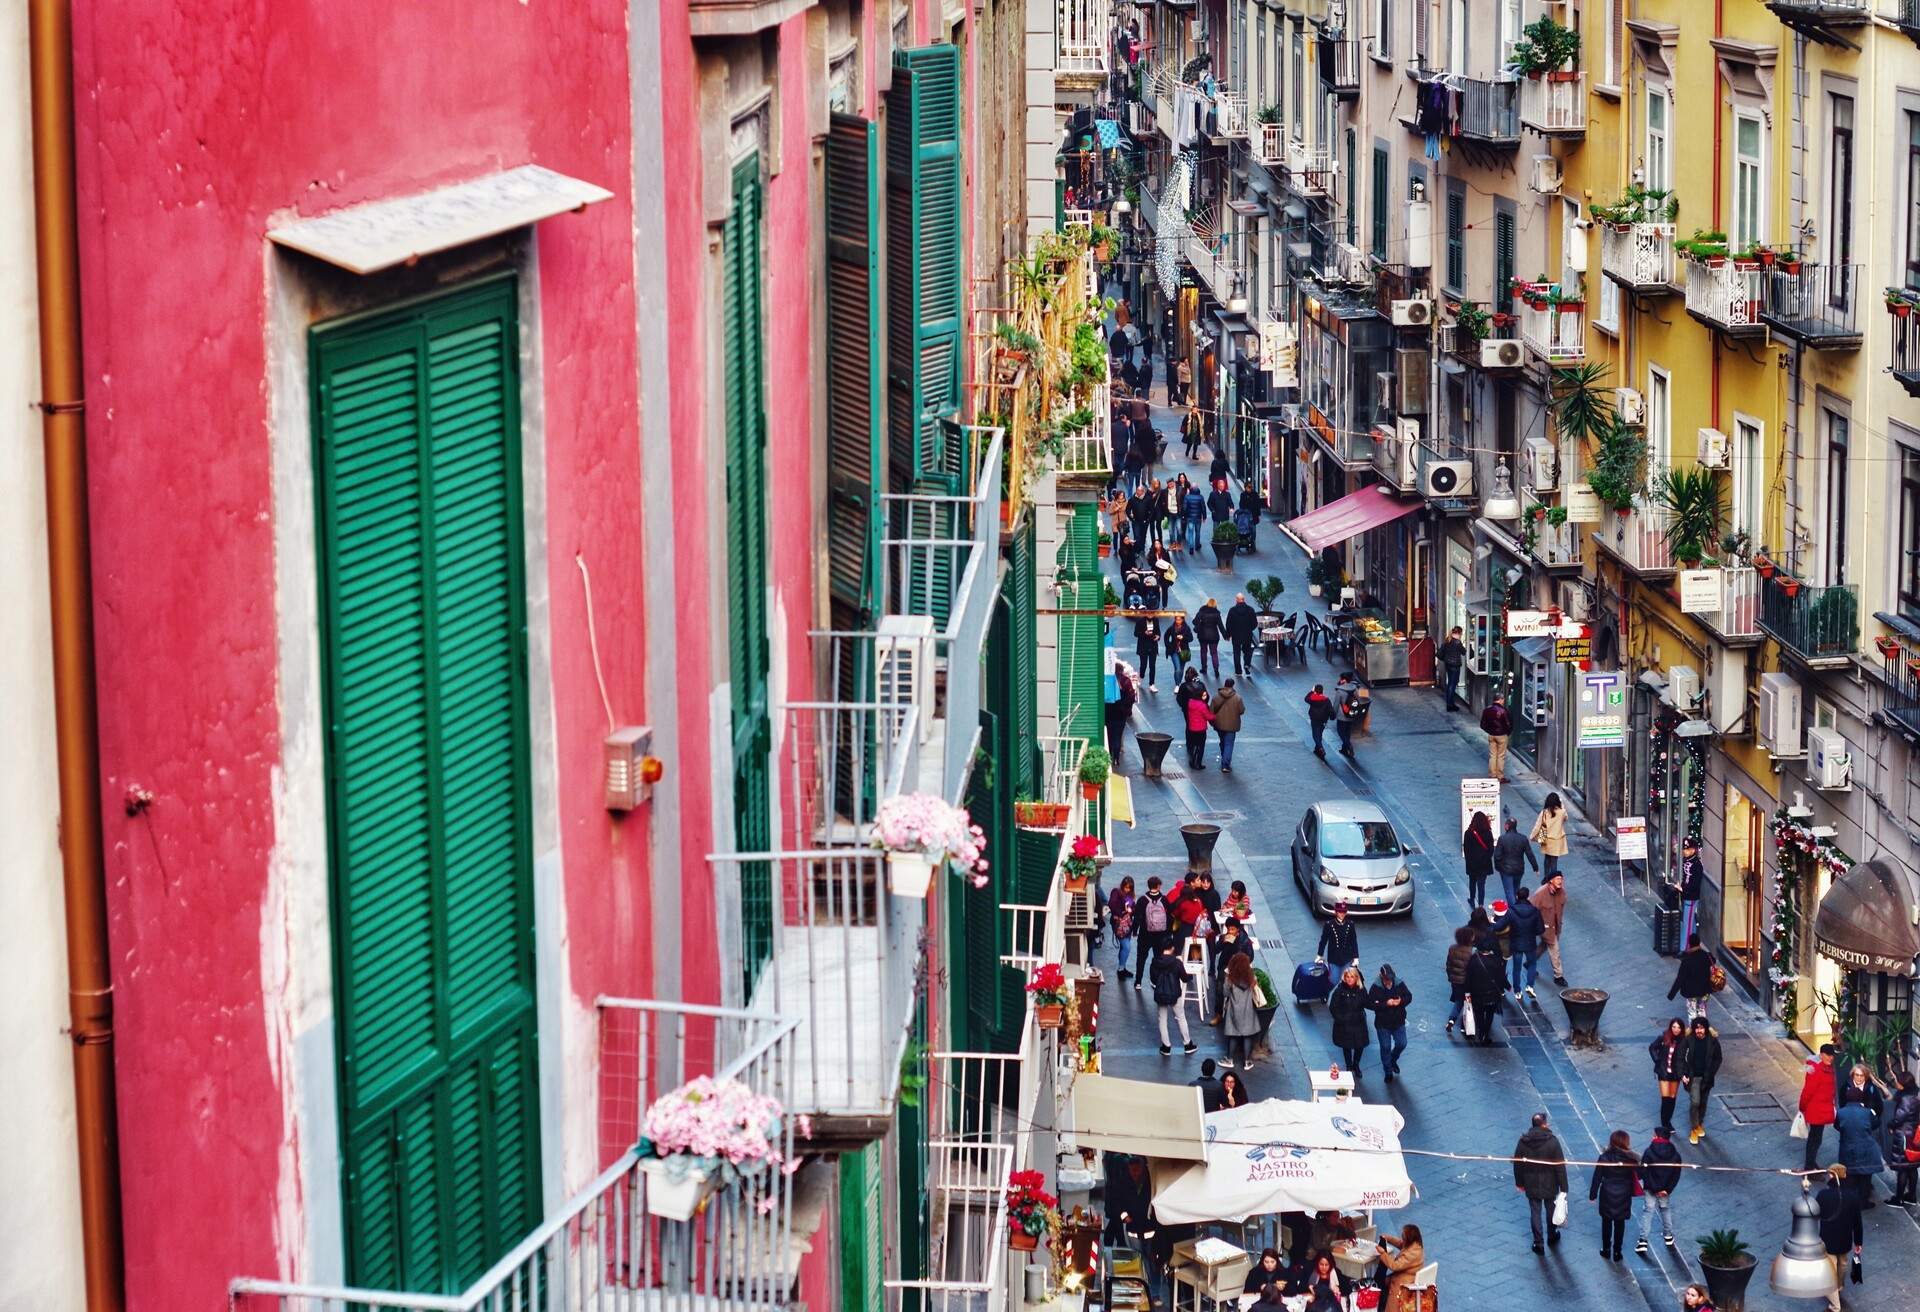 Naples, Via Chiaia is a long street full of shops, most of those are expensive, stilish shops, but you can also find good value shops